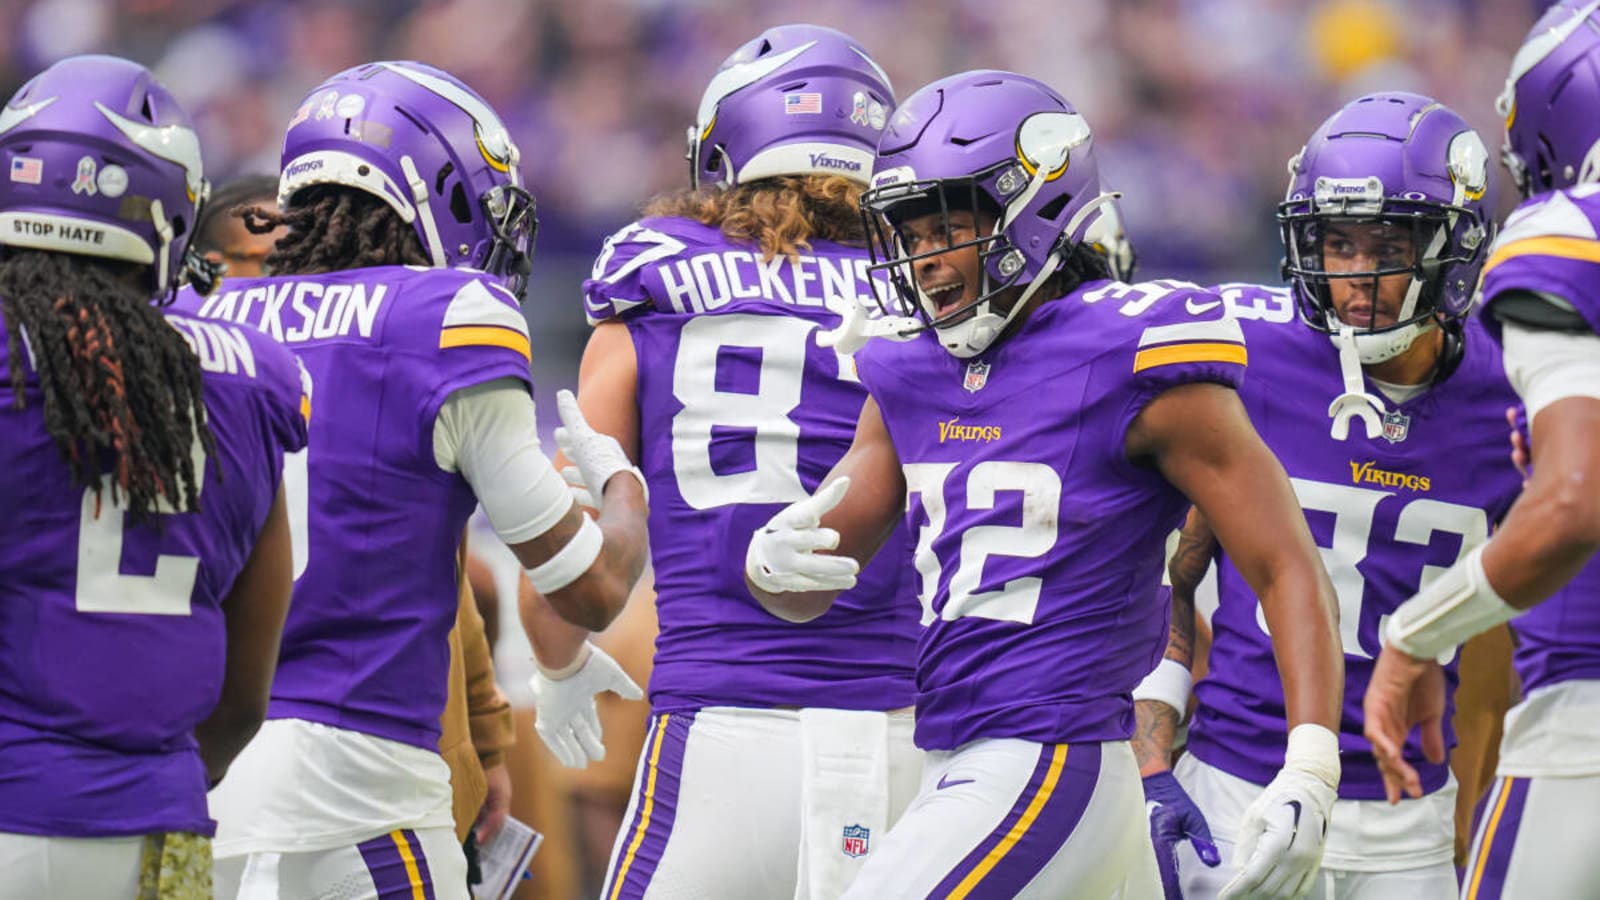 One permanent lineup change the Vikings must make